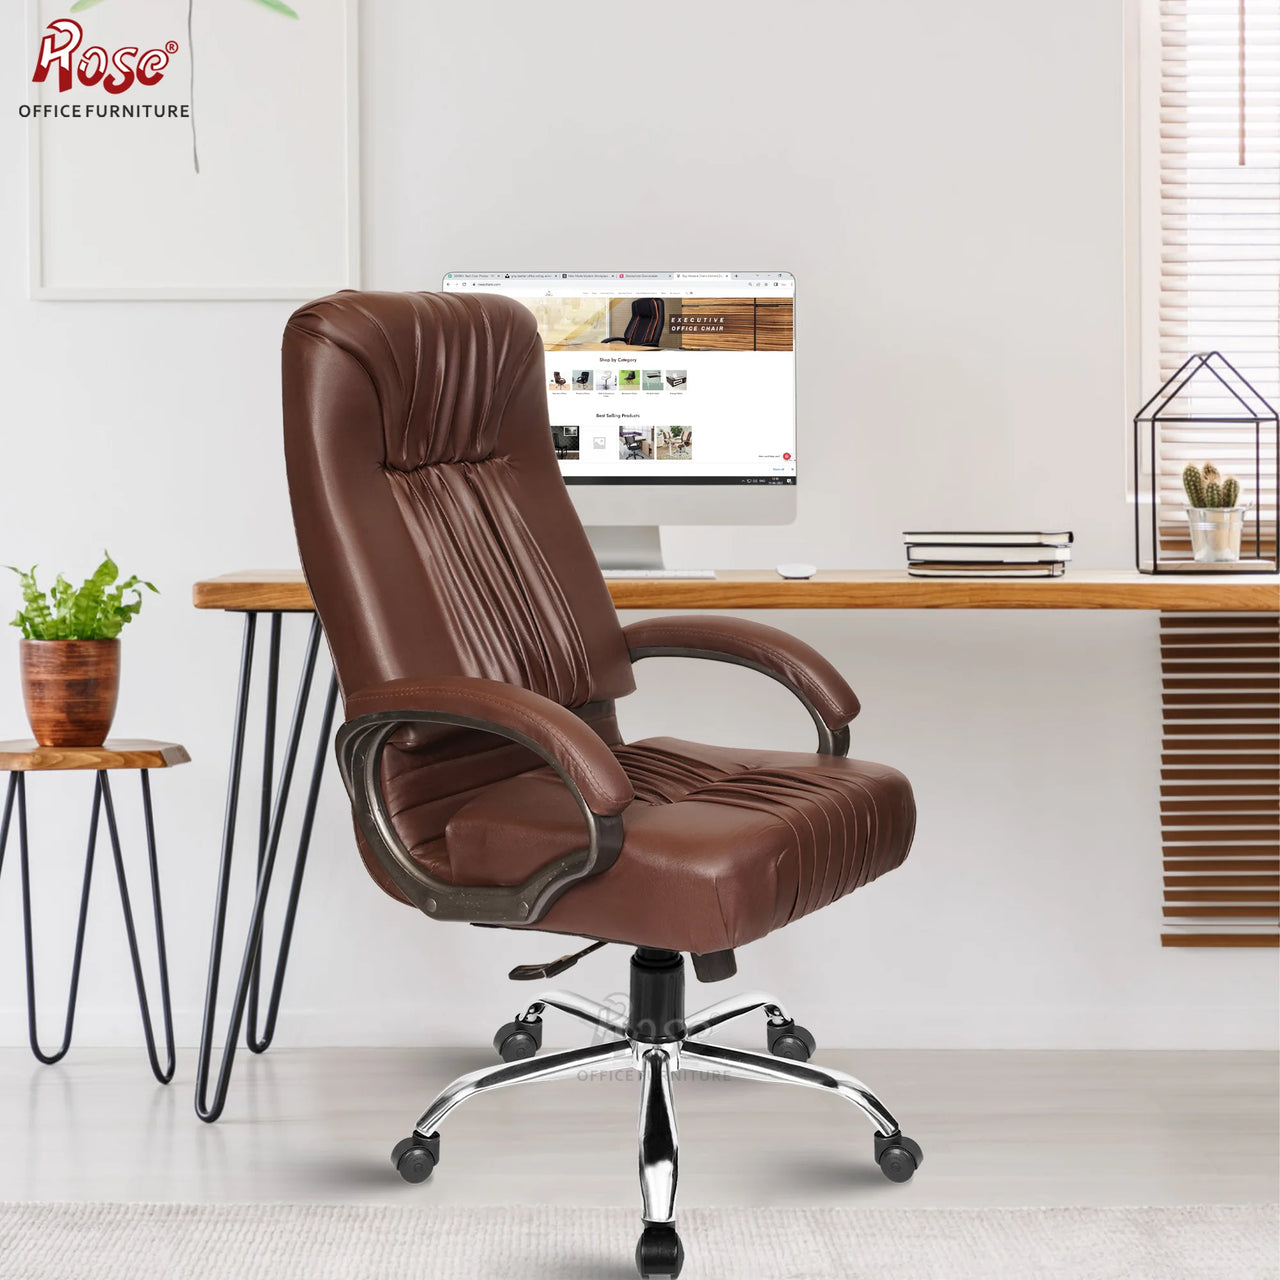 Black Beauty Leatherette Executive High Back Revolving Office Chair (Brown)